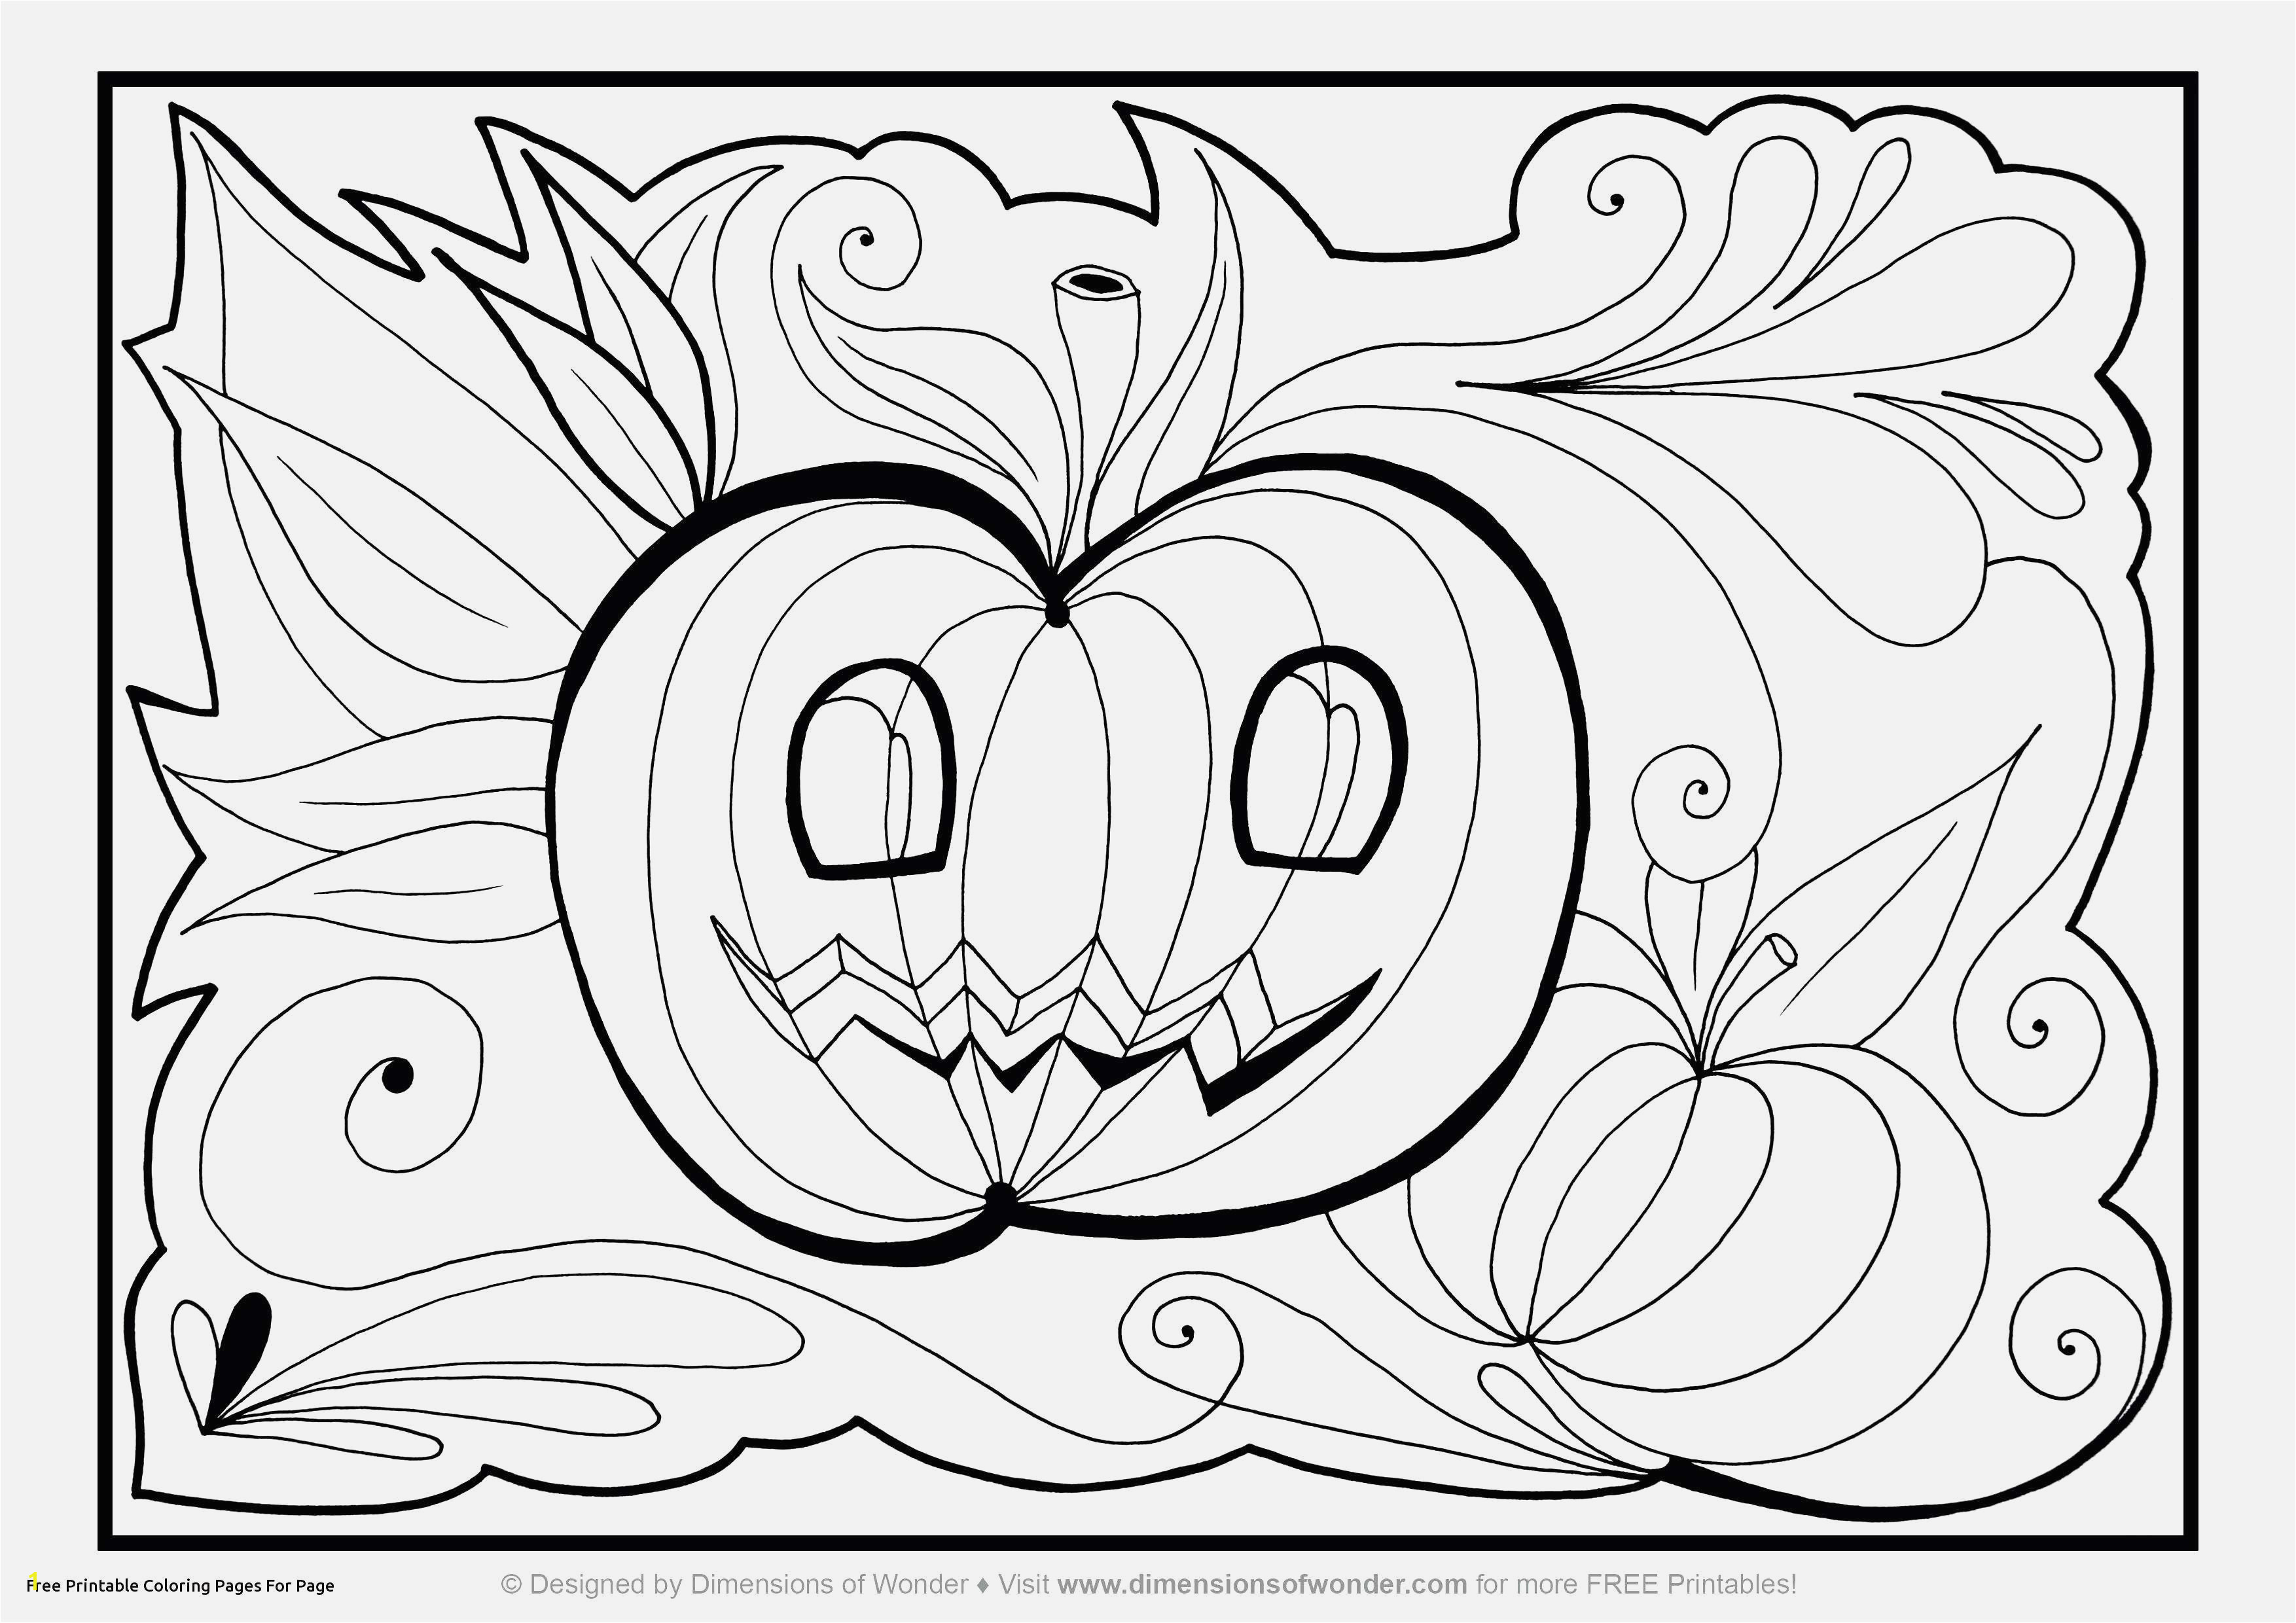 Free Fall Coloring Pages Free Fall Coloring Pages Adults Greatest 16 Coloring Pages Printable Free